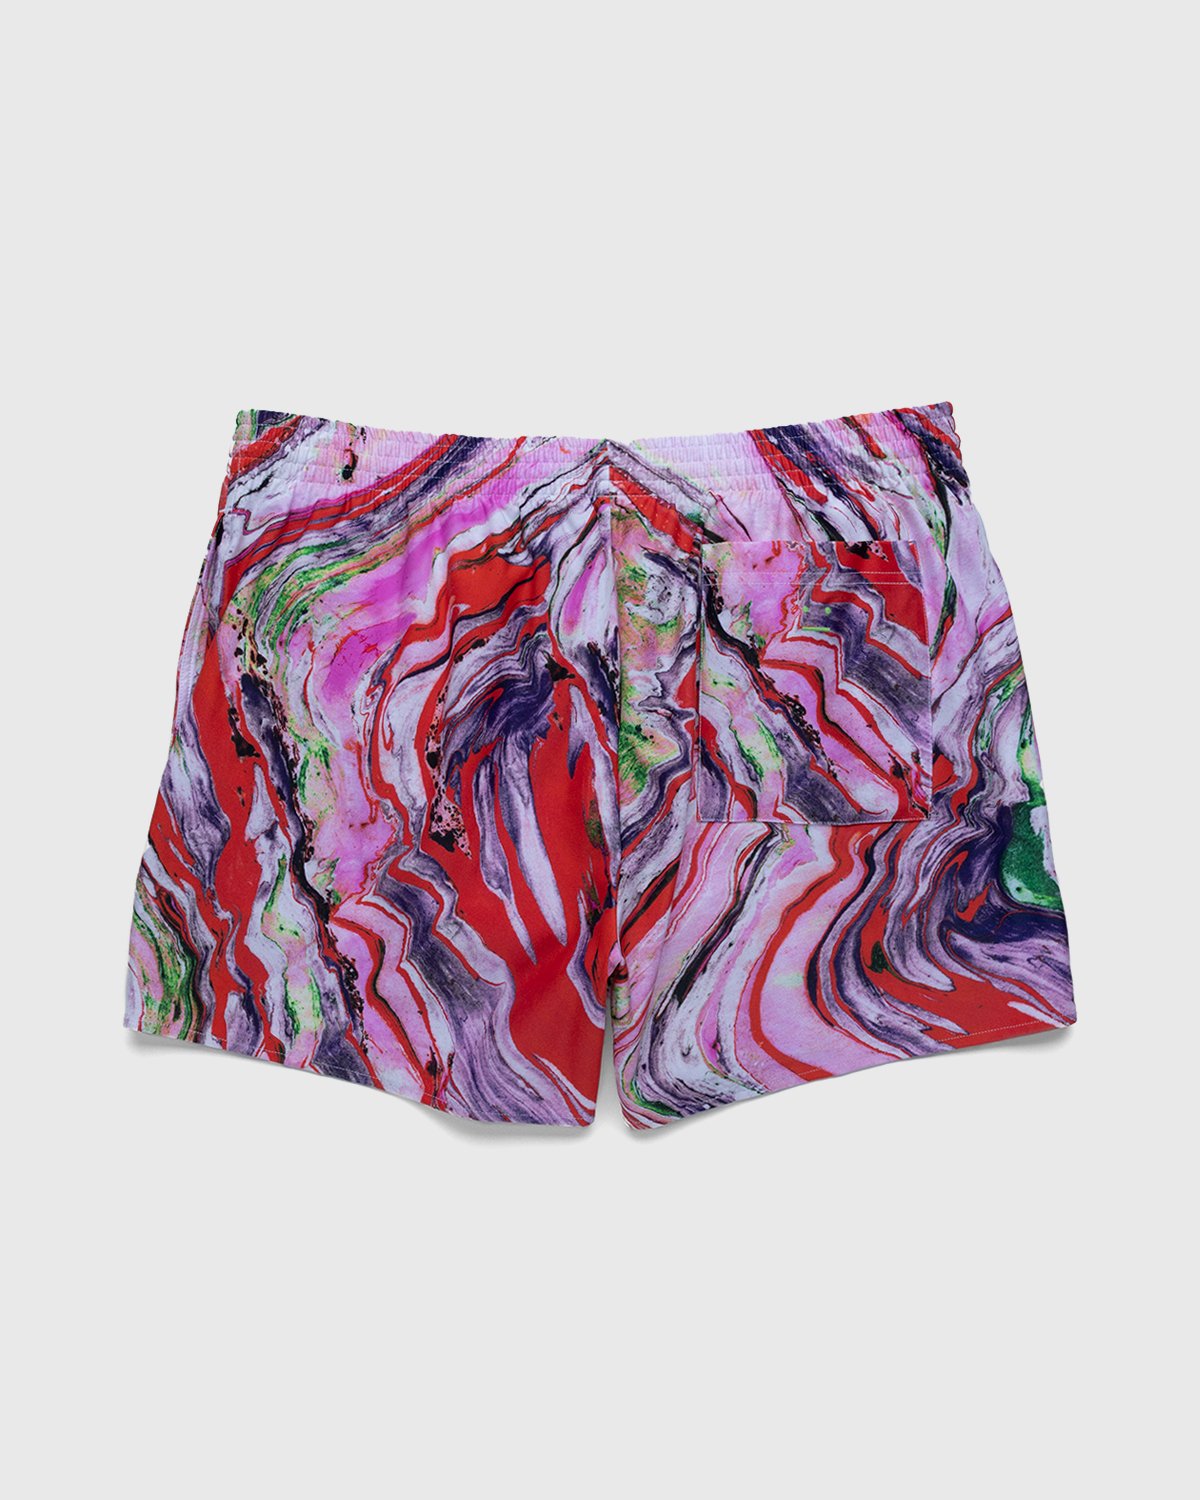 Acne Studios - Marble Swim Shorts Neon Red - Clothing - Red - Image 2